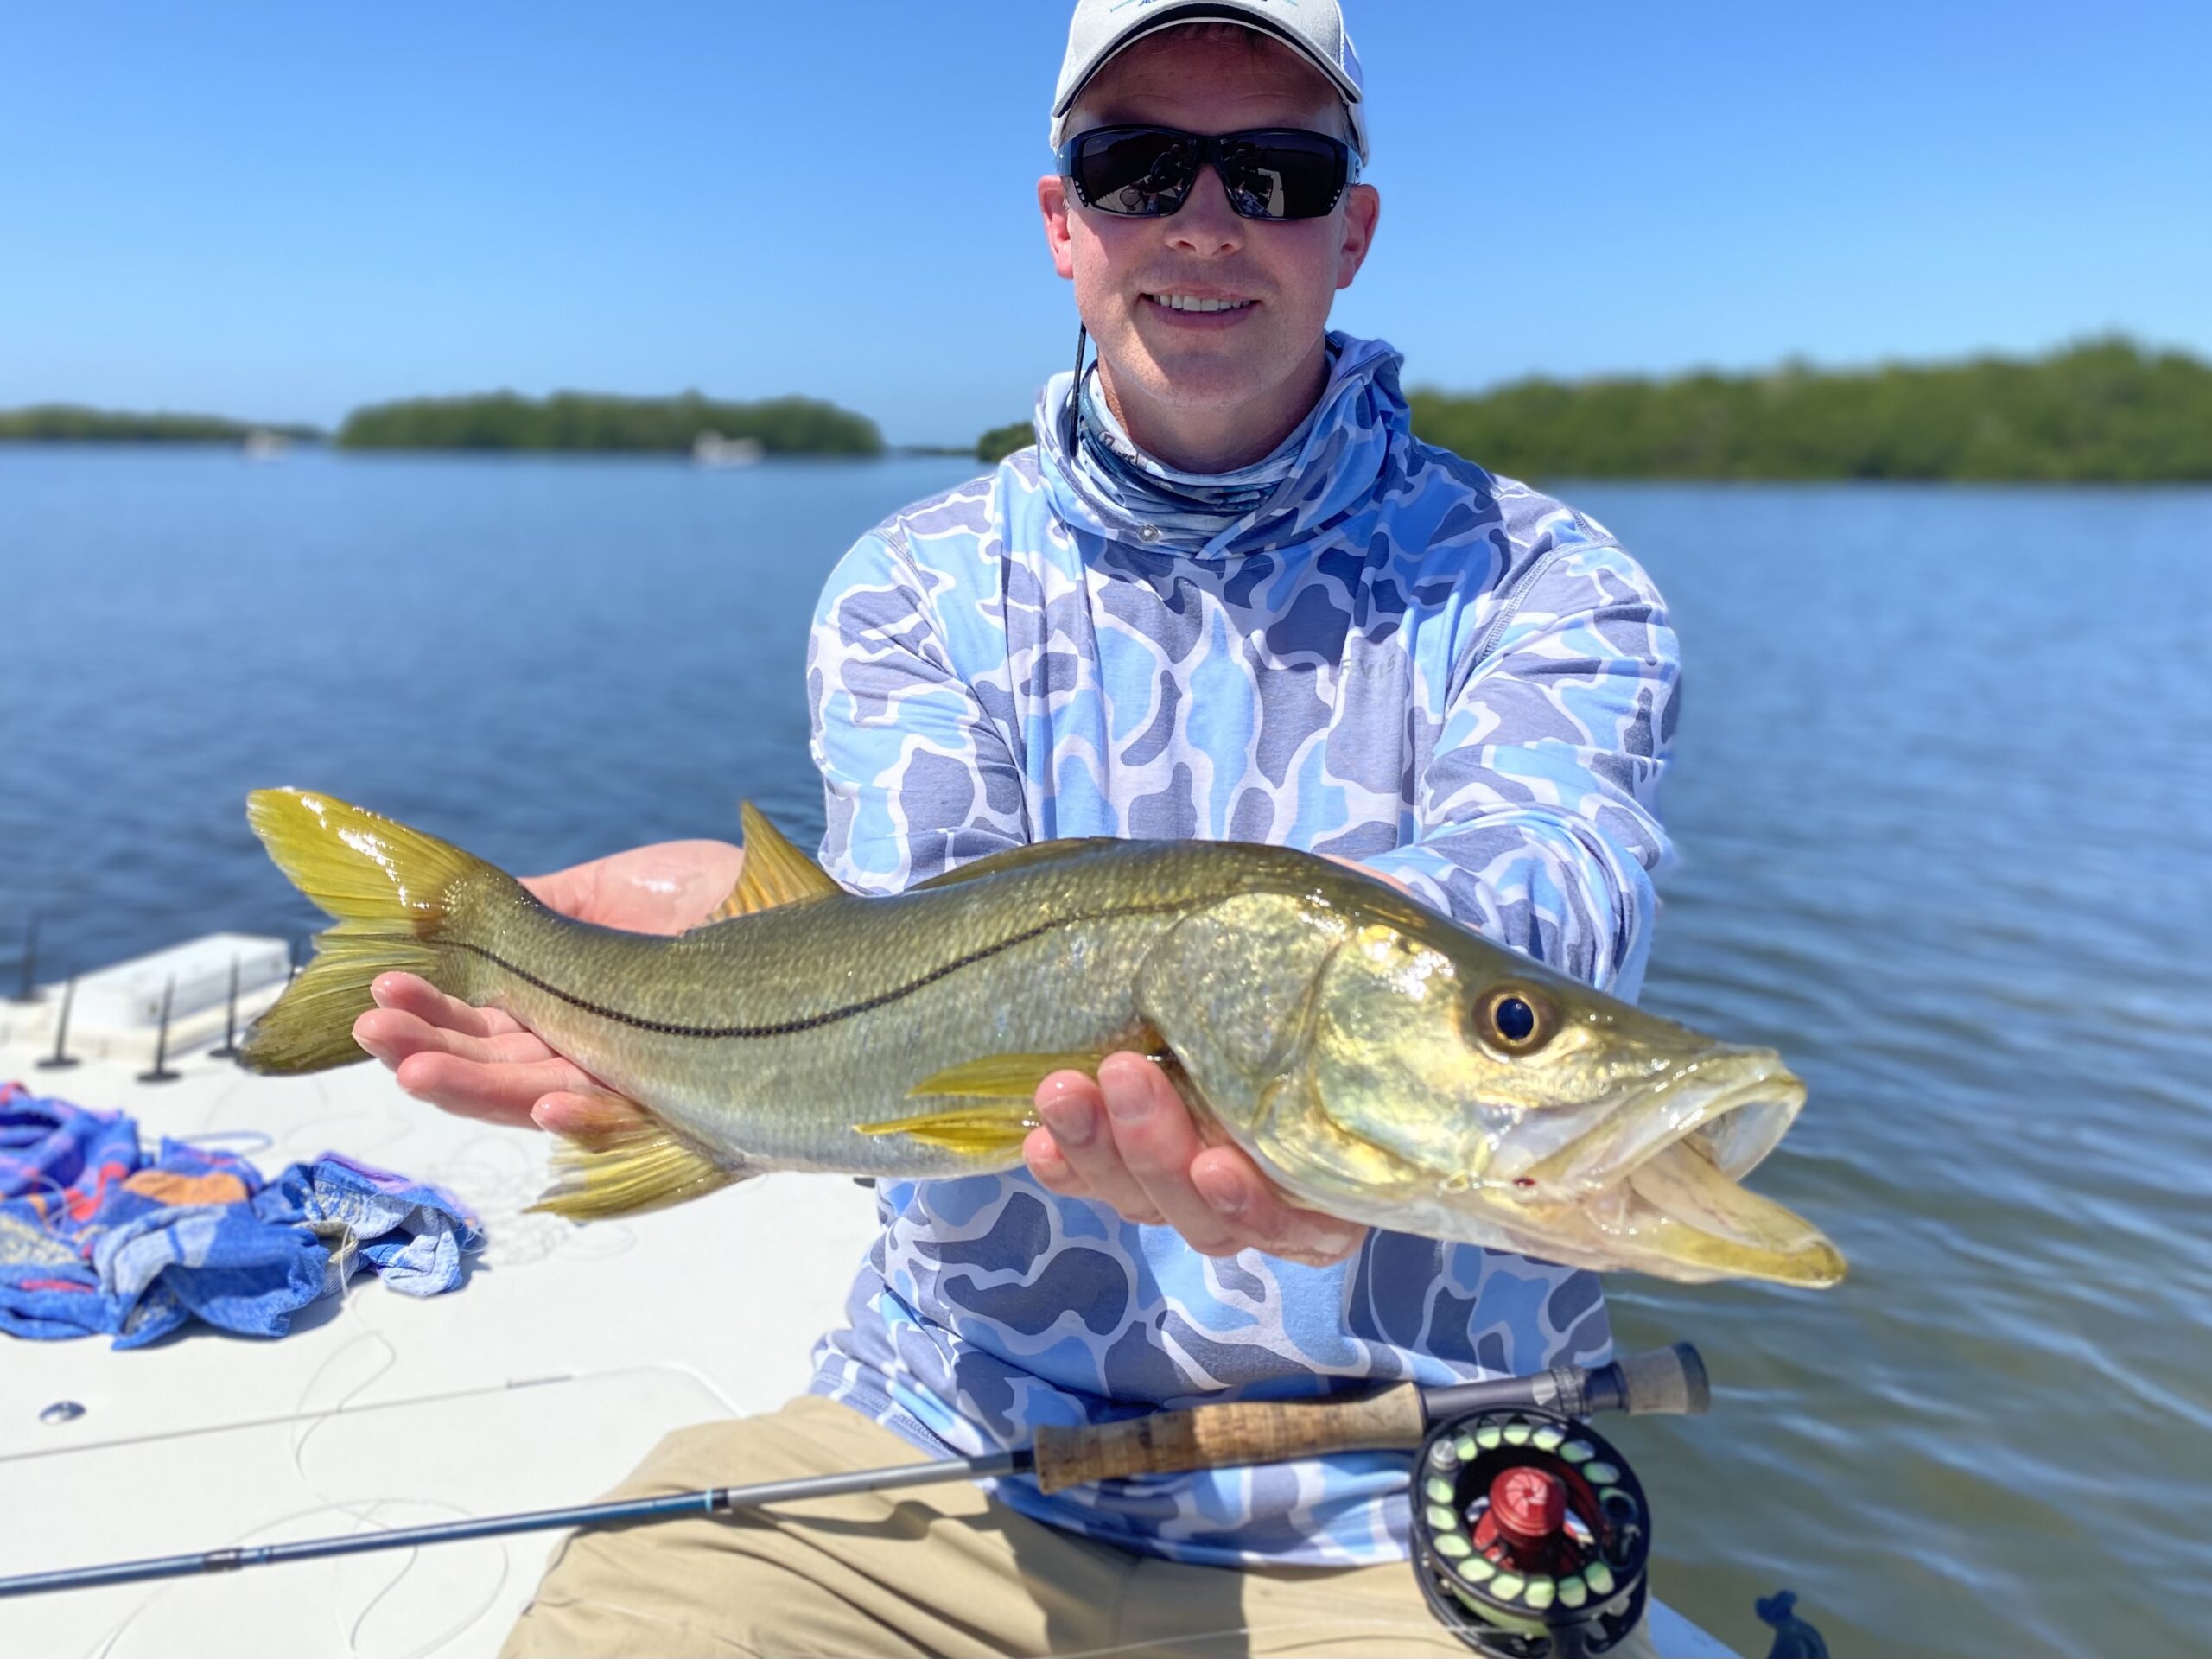 An angler holds a snook that he caught while fly fishing in tampa bay